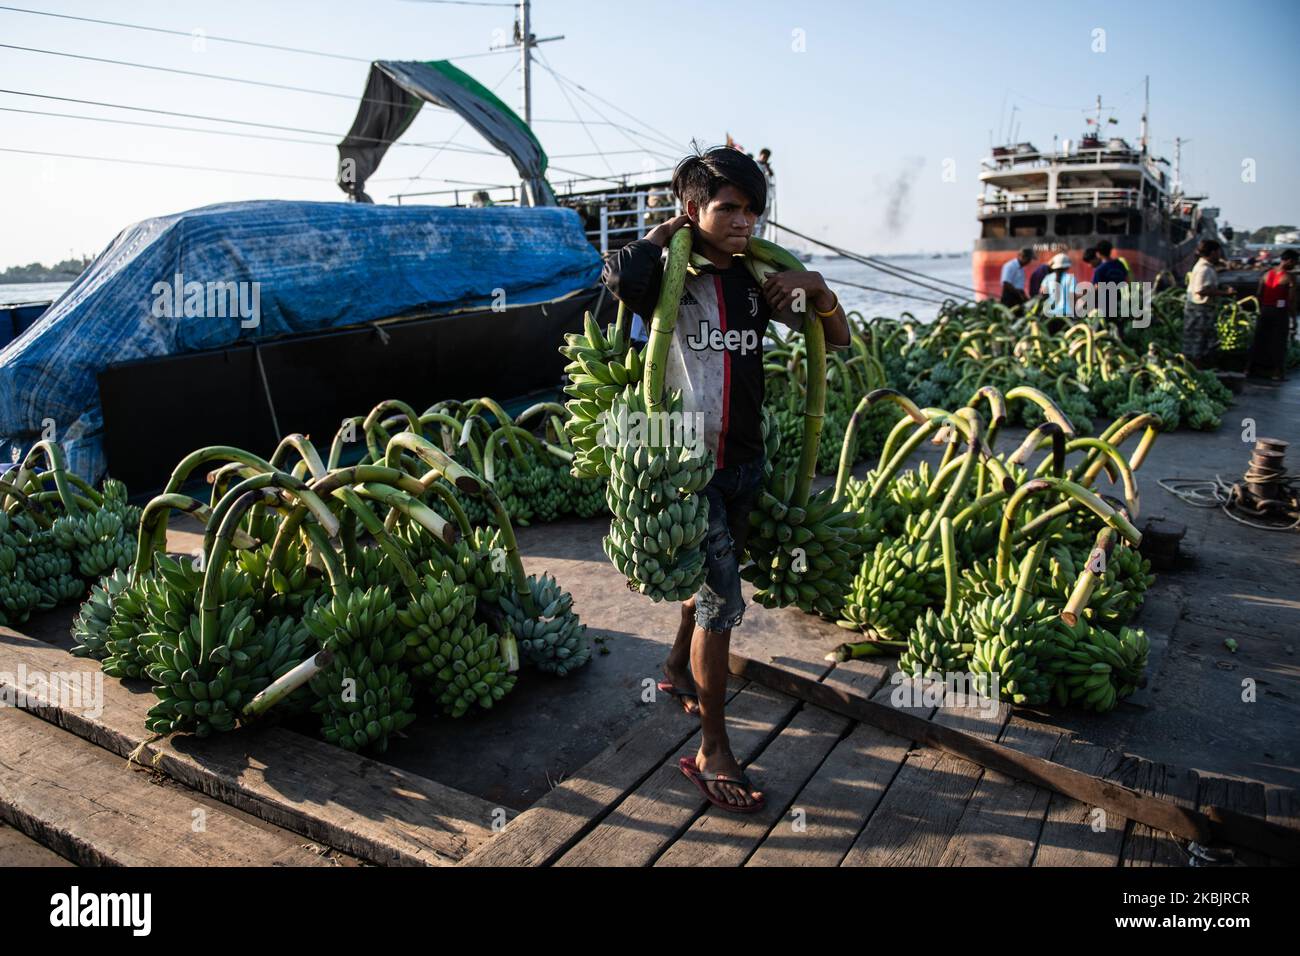 A man carries bananas unloaded from a boat at a jetty in Yangon, Myanmar on March 10, 2020. (Photo by Shwe Paw Mya Tin/NurPhoto) Stock Photo